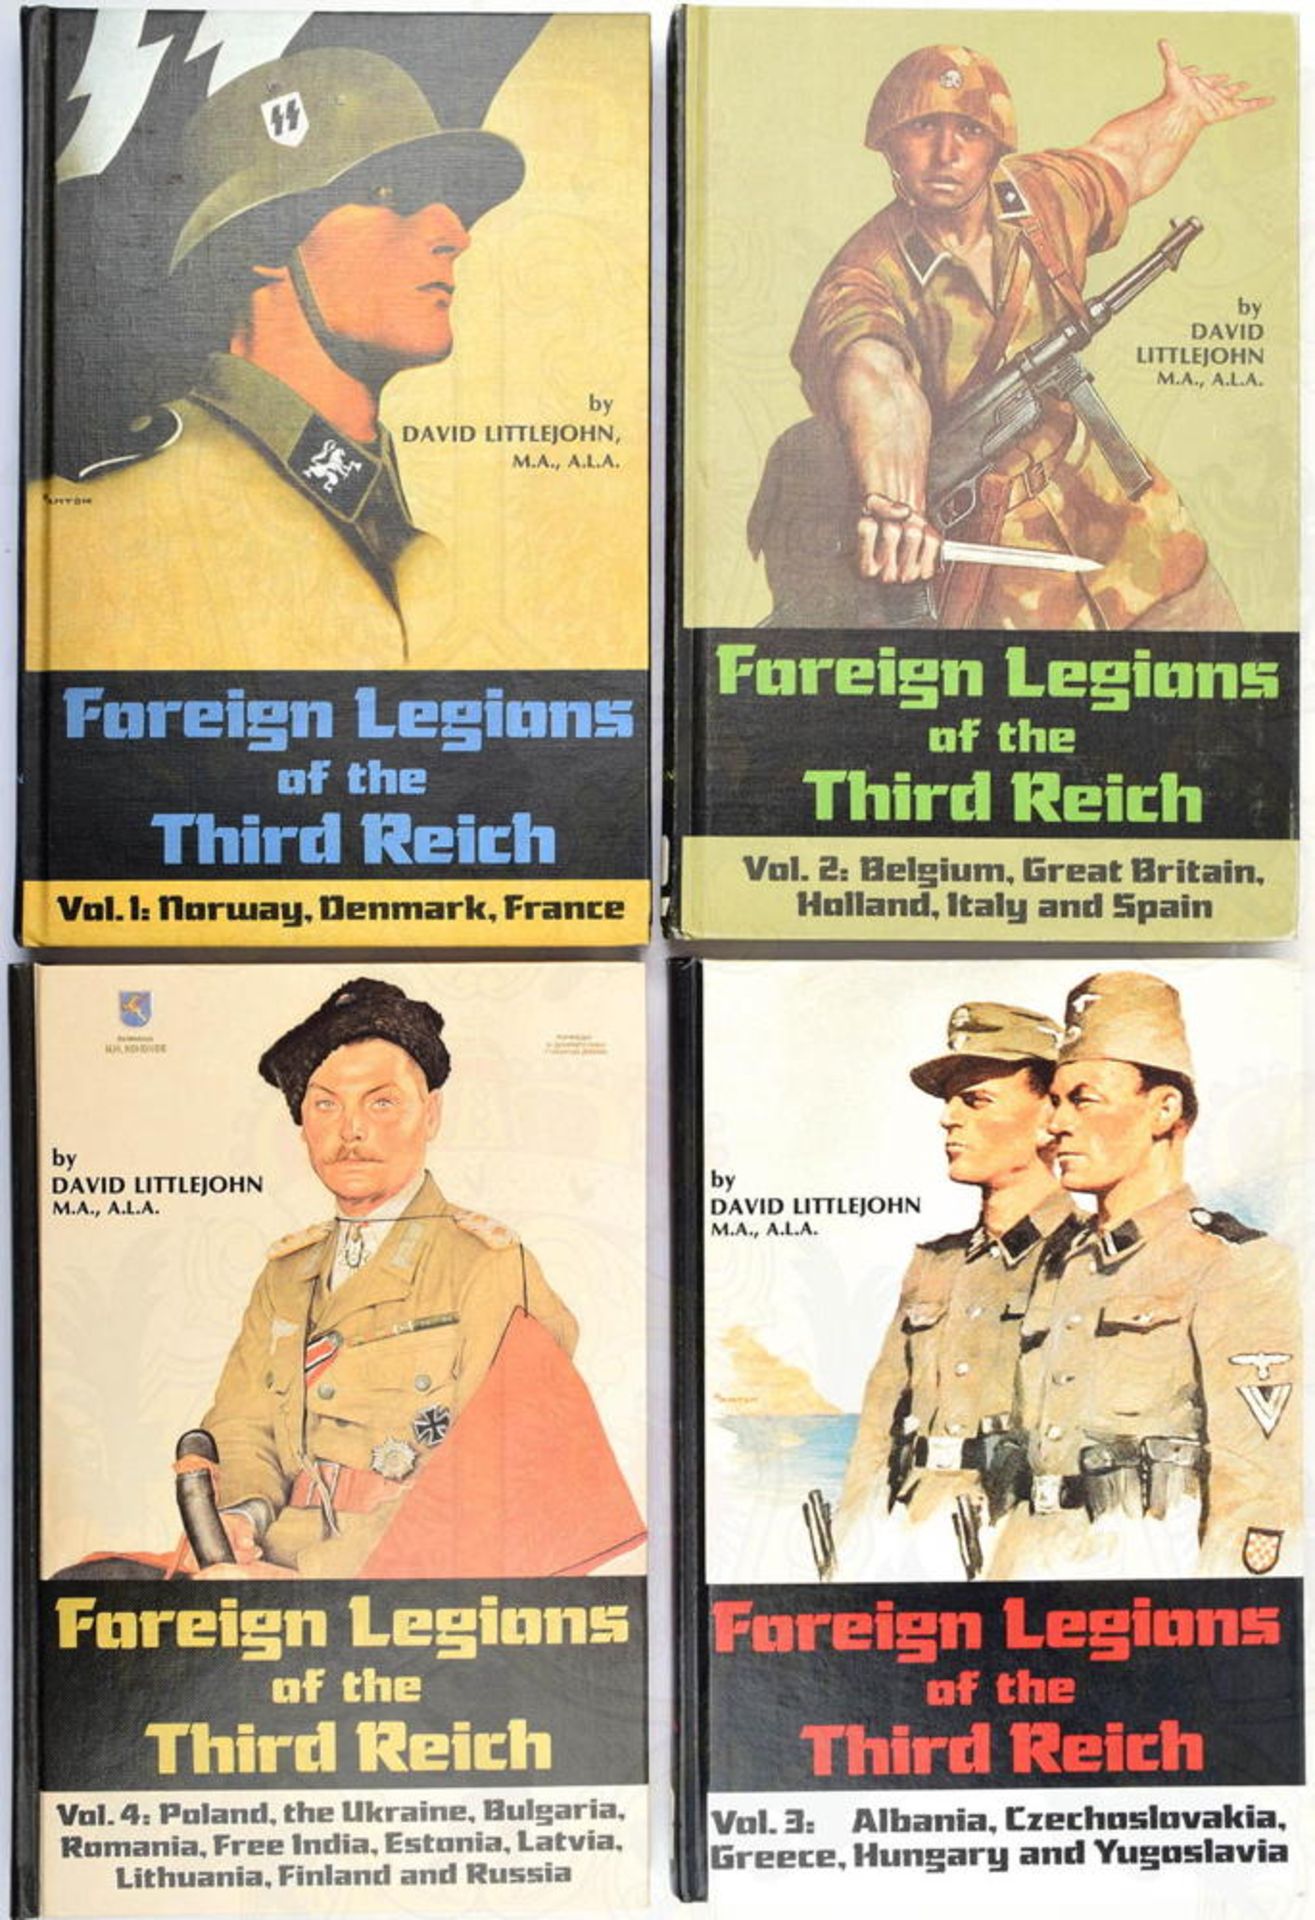 FOREIGN LEGIONS OF THE THIRD REICH, Bände 1-4, D. Littlejohn, San Jose 1979-1985, ges. 1200 S., engl